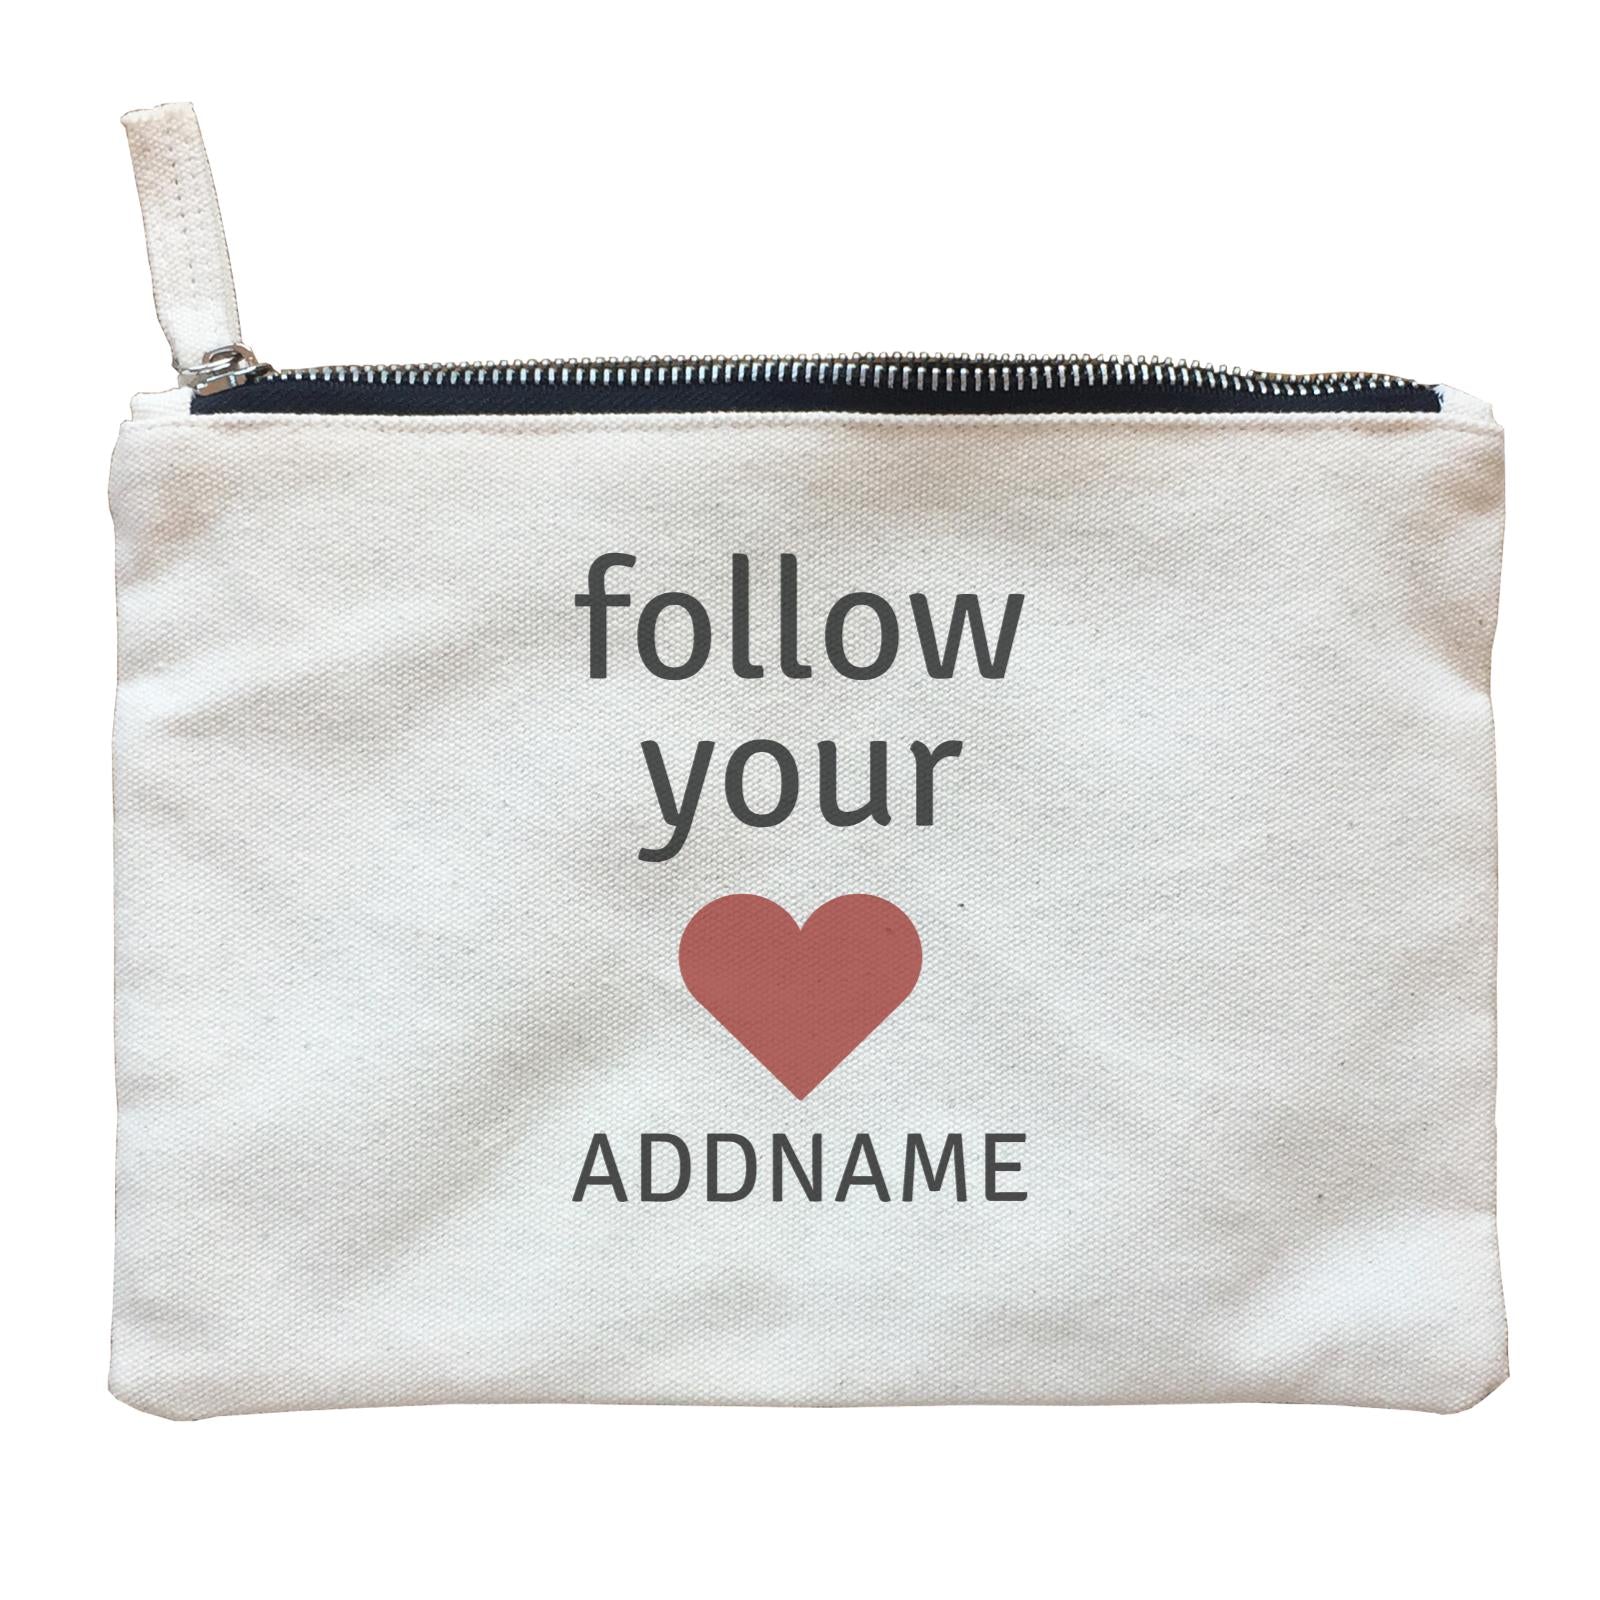 Inspiration Quotes Follow Your Heart Addname Zipper Pouch